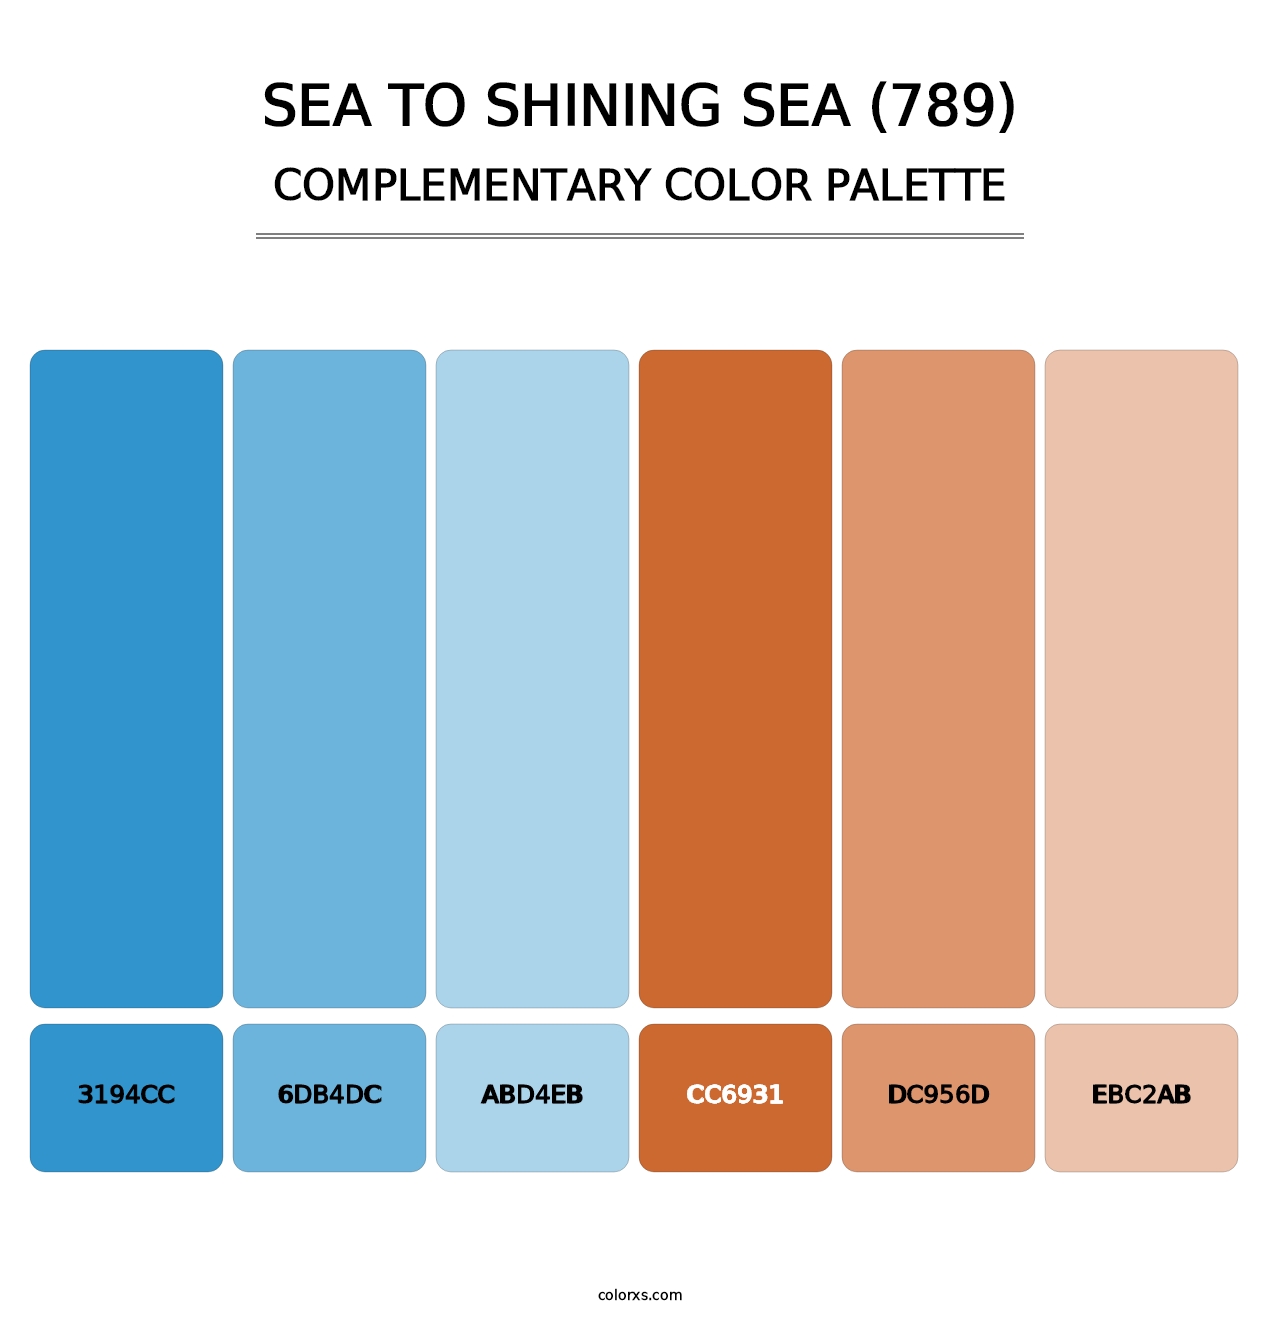 Sea to Shining Sea (789) - Complementary Color Palette